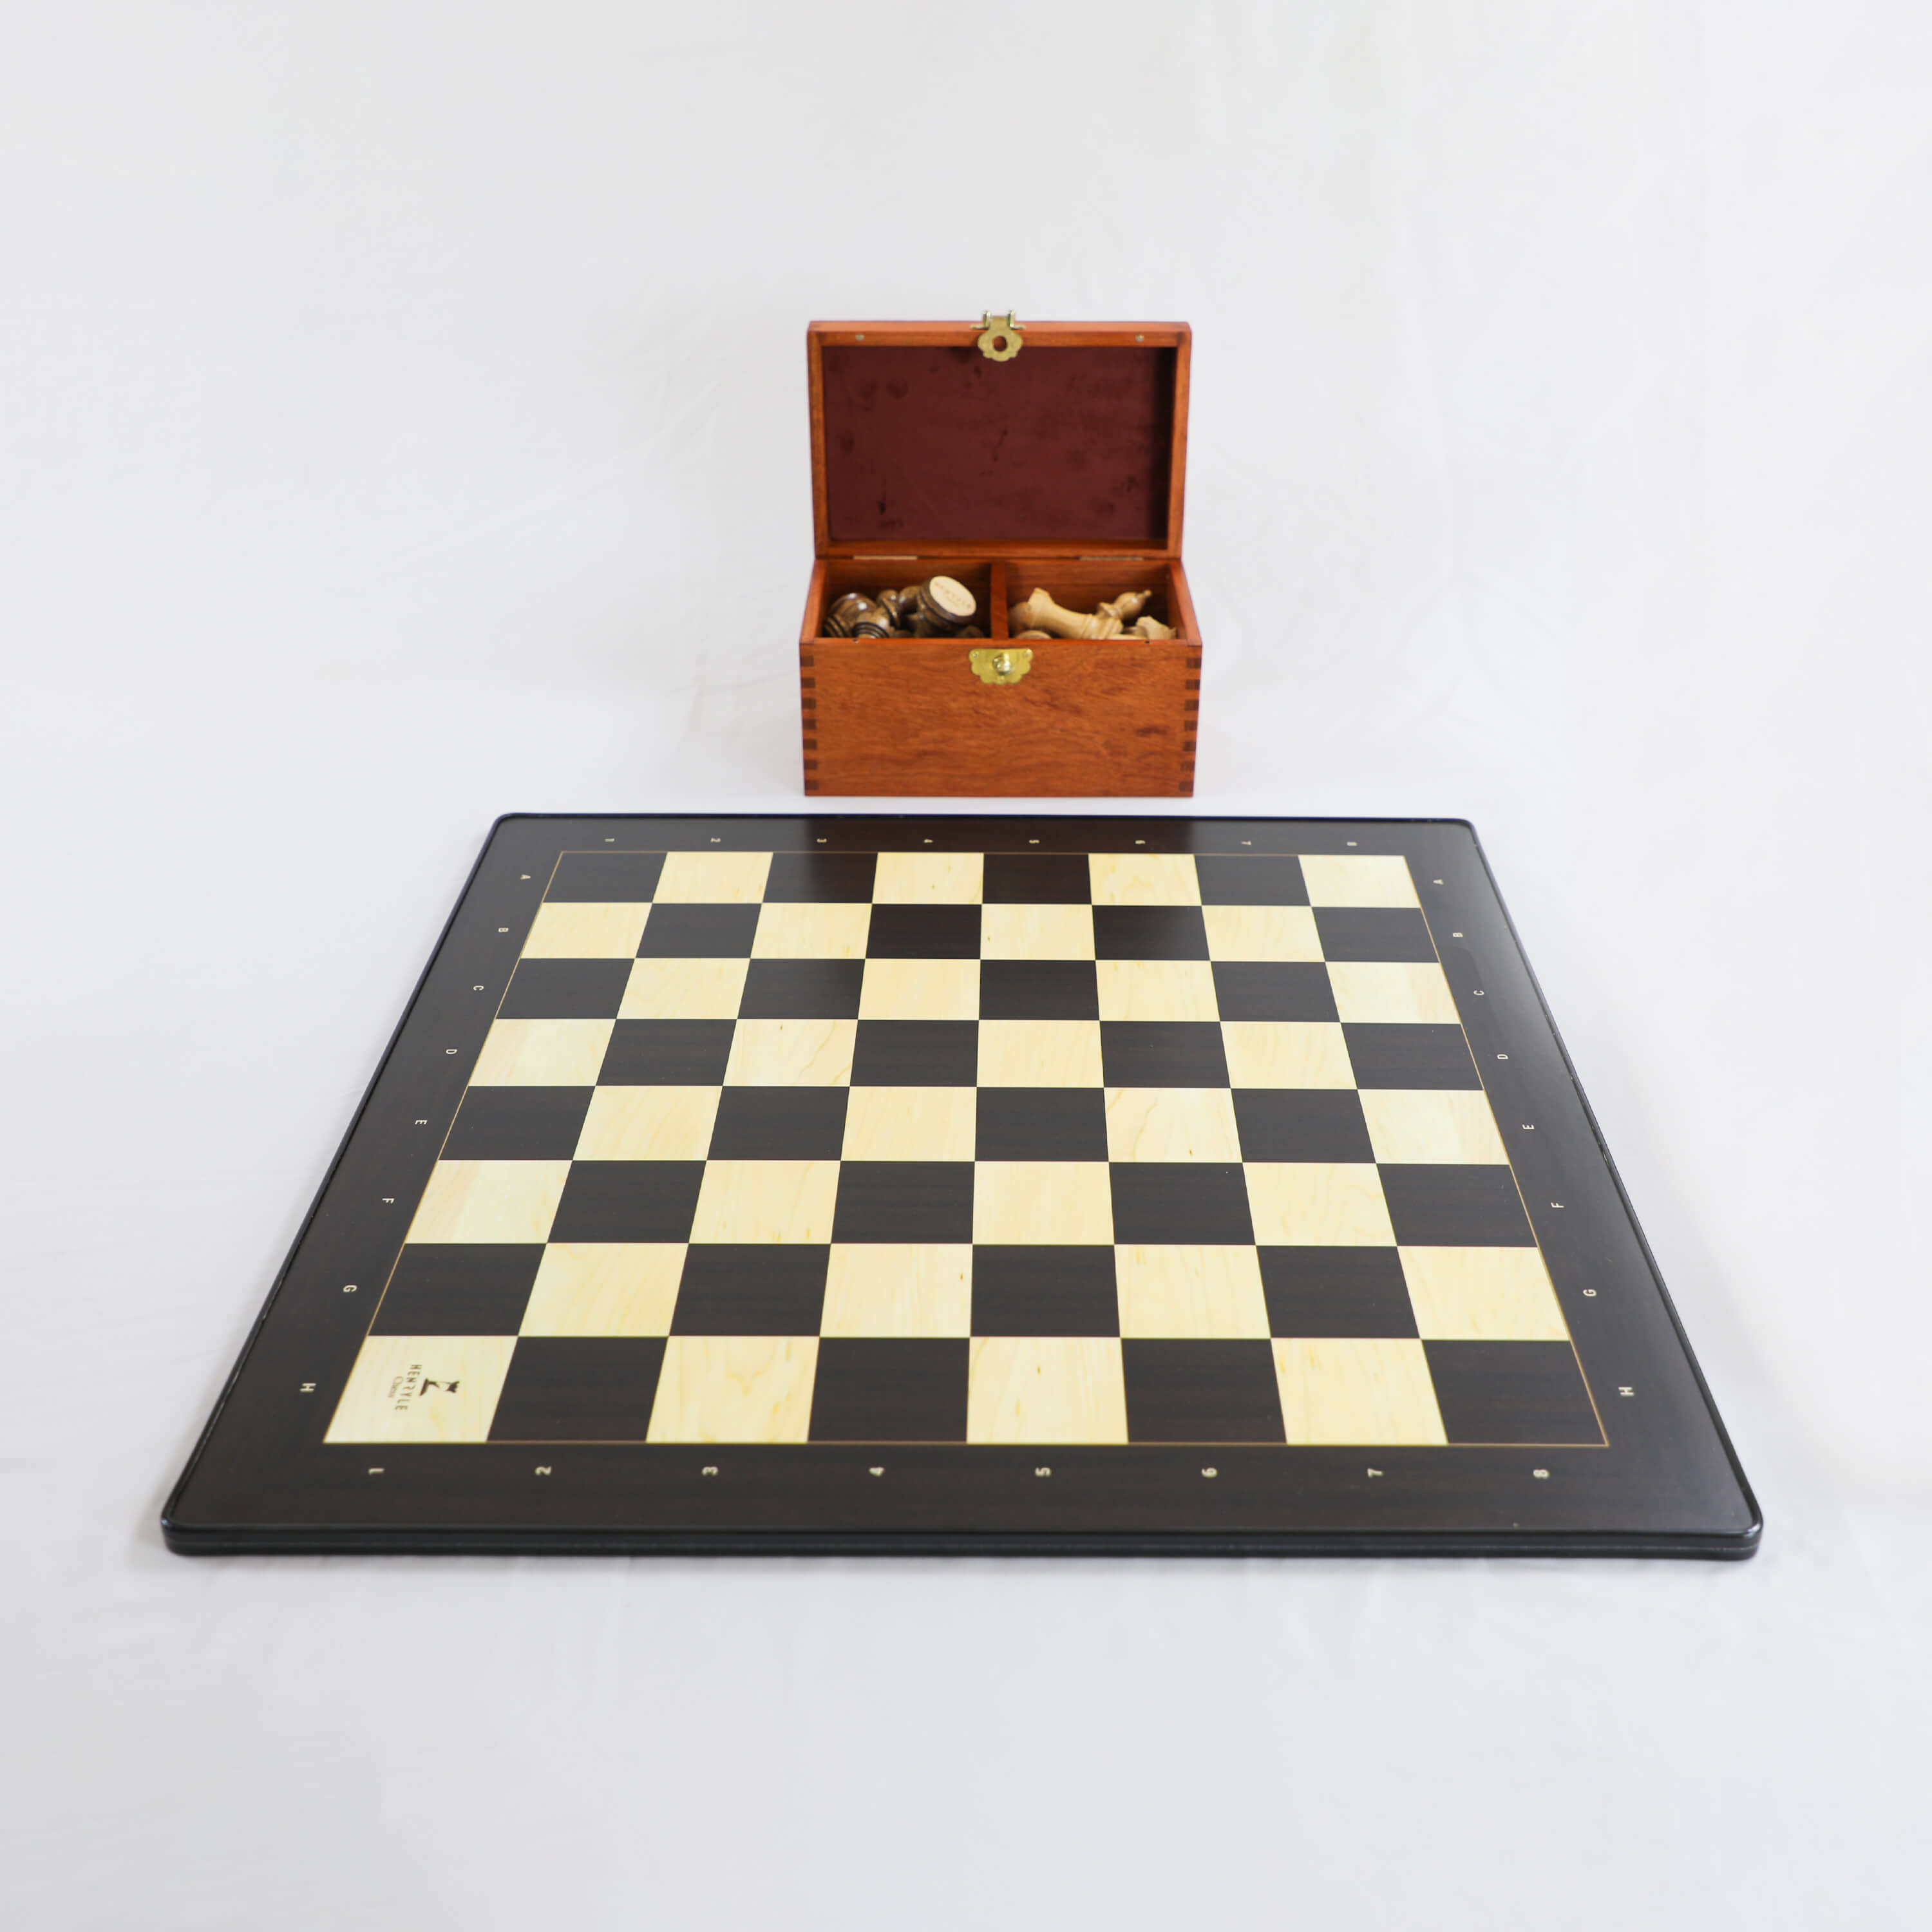 Standard Ebony & Ash Wood Chess Pieces with Wooden Chess Box and Flat Chess Board